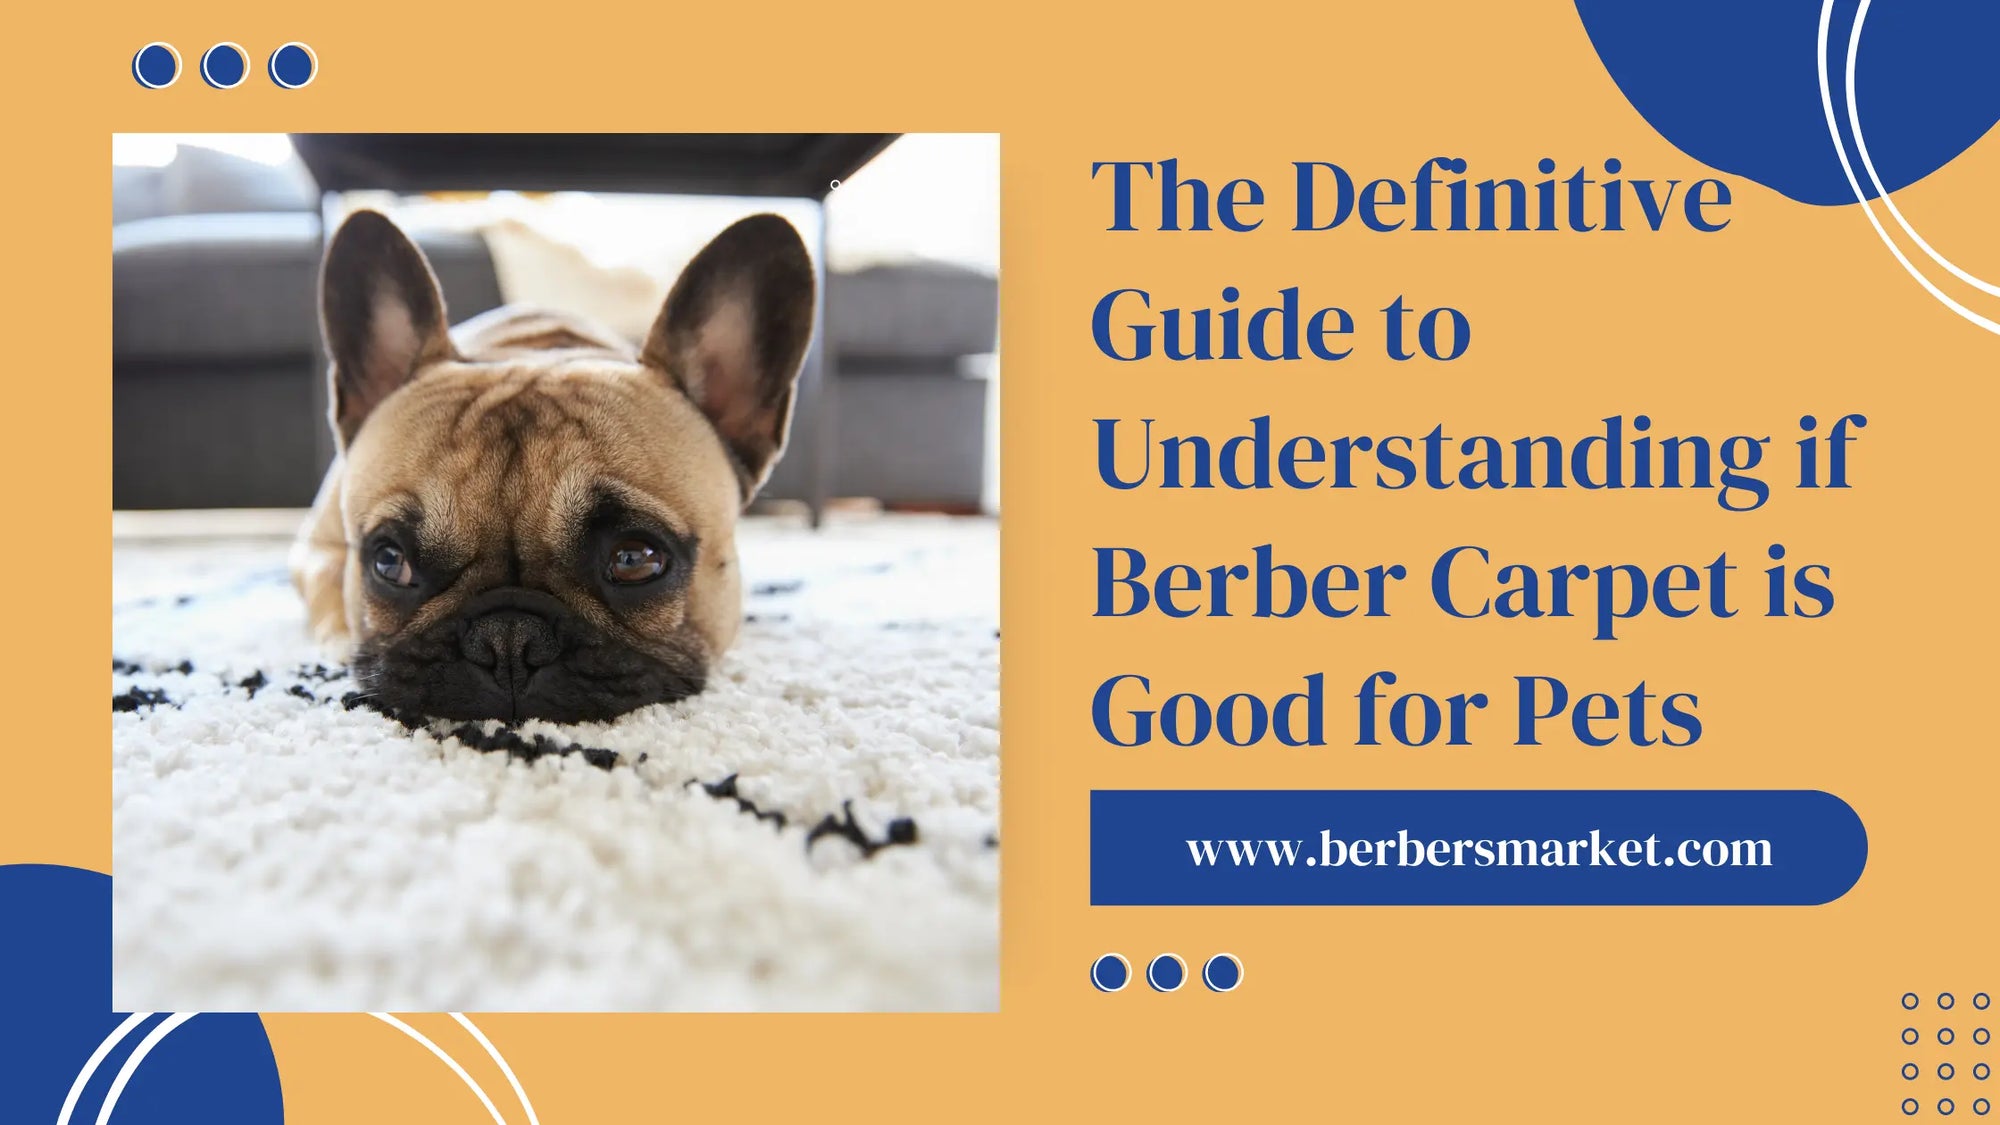 Blog banner for The Definitive Guide to Understanding if Berber Carpet is Good for Pets